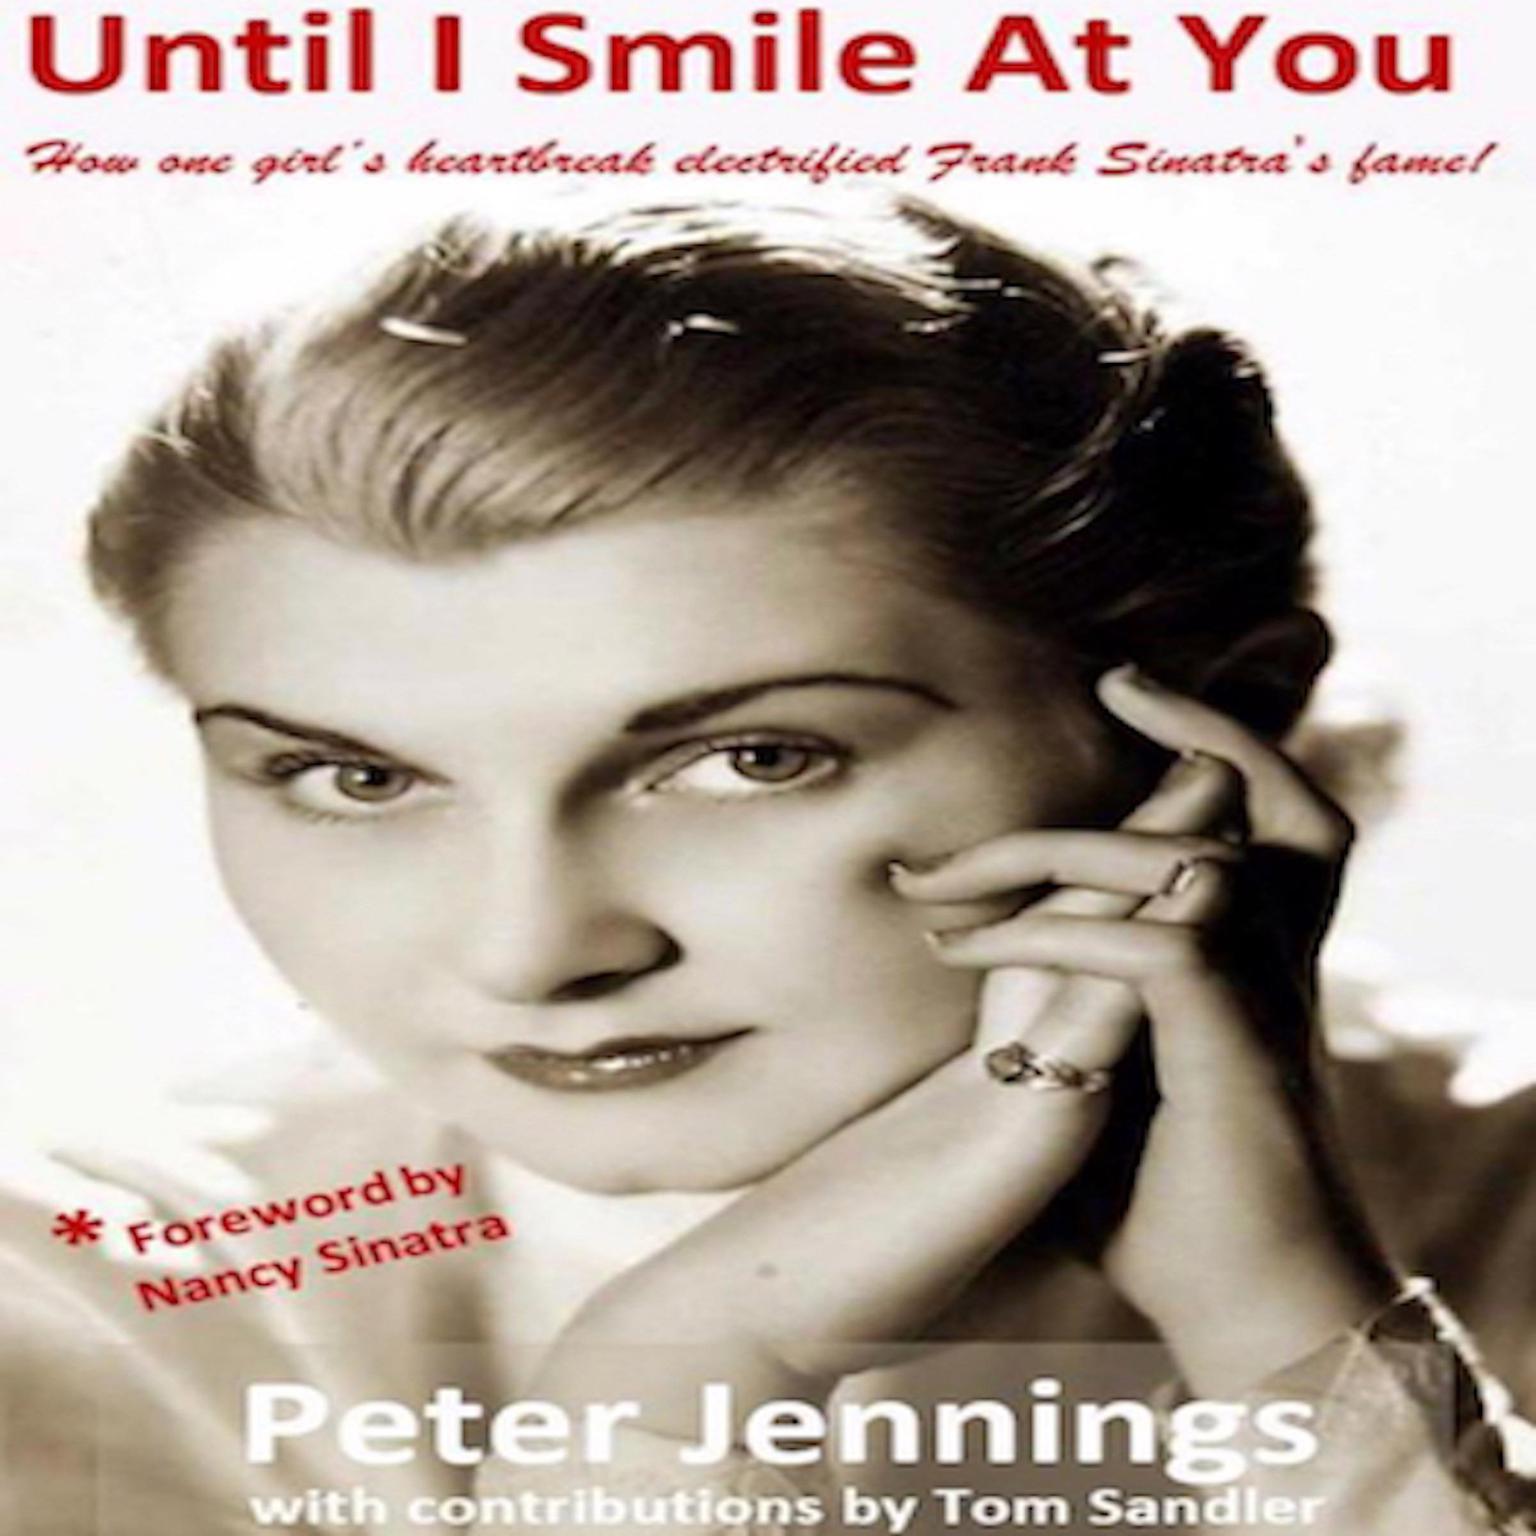 Until I Smile At You: How one girls heartbreak electrified Frank Sinatras fame Audiobook, by Peter Jennings